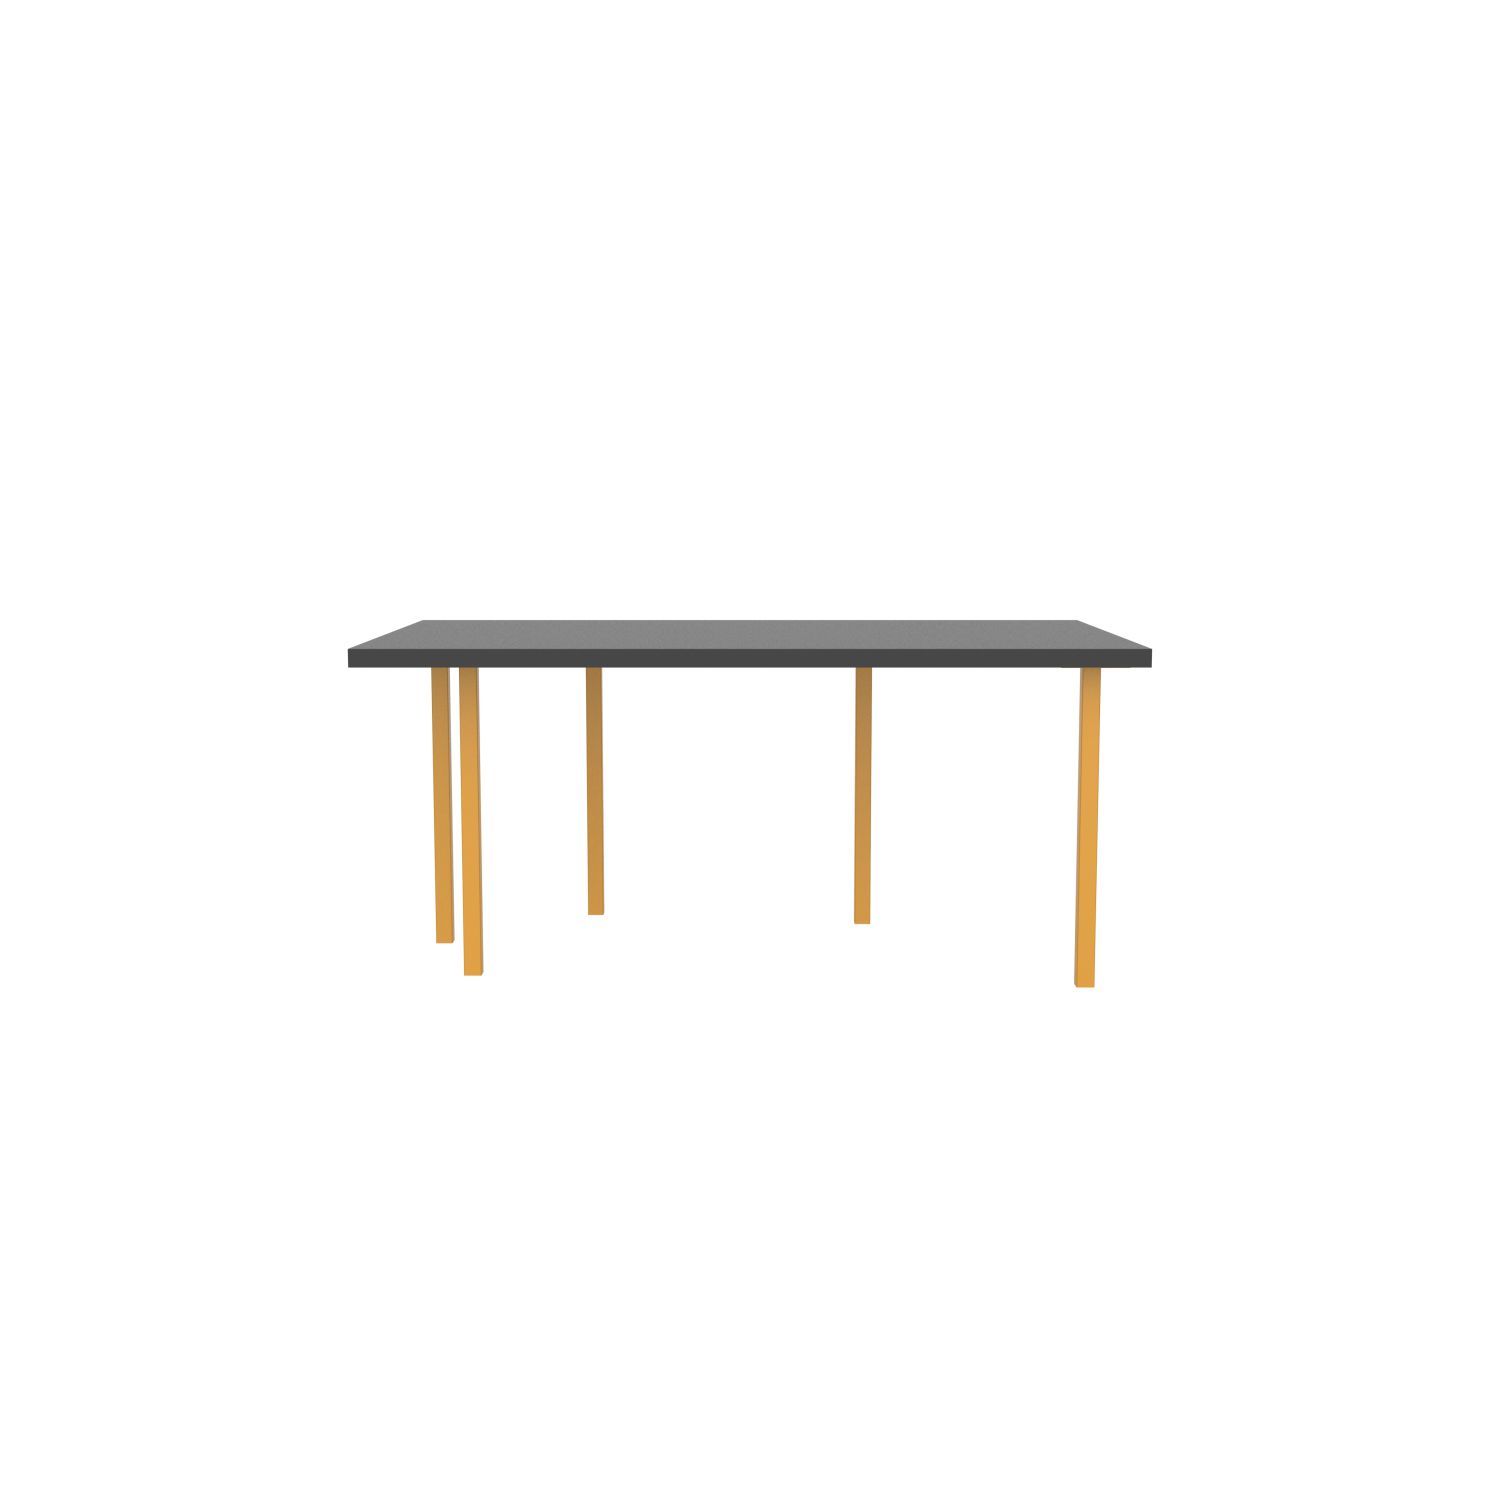 lensvelt bbrand table five fixed heigt 103x172 hpl black 50 mm price level 1 yellow ral1004